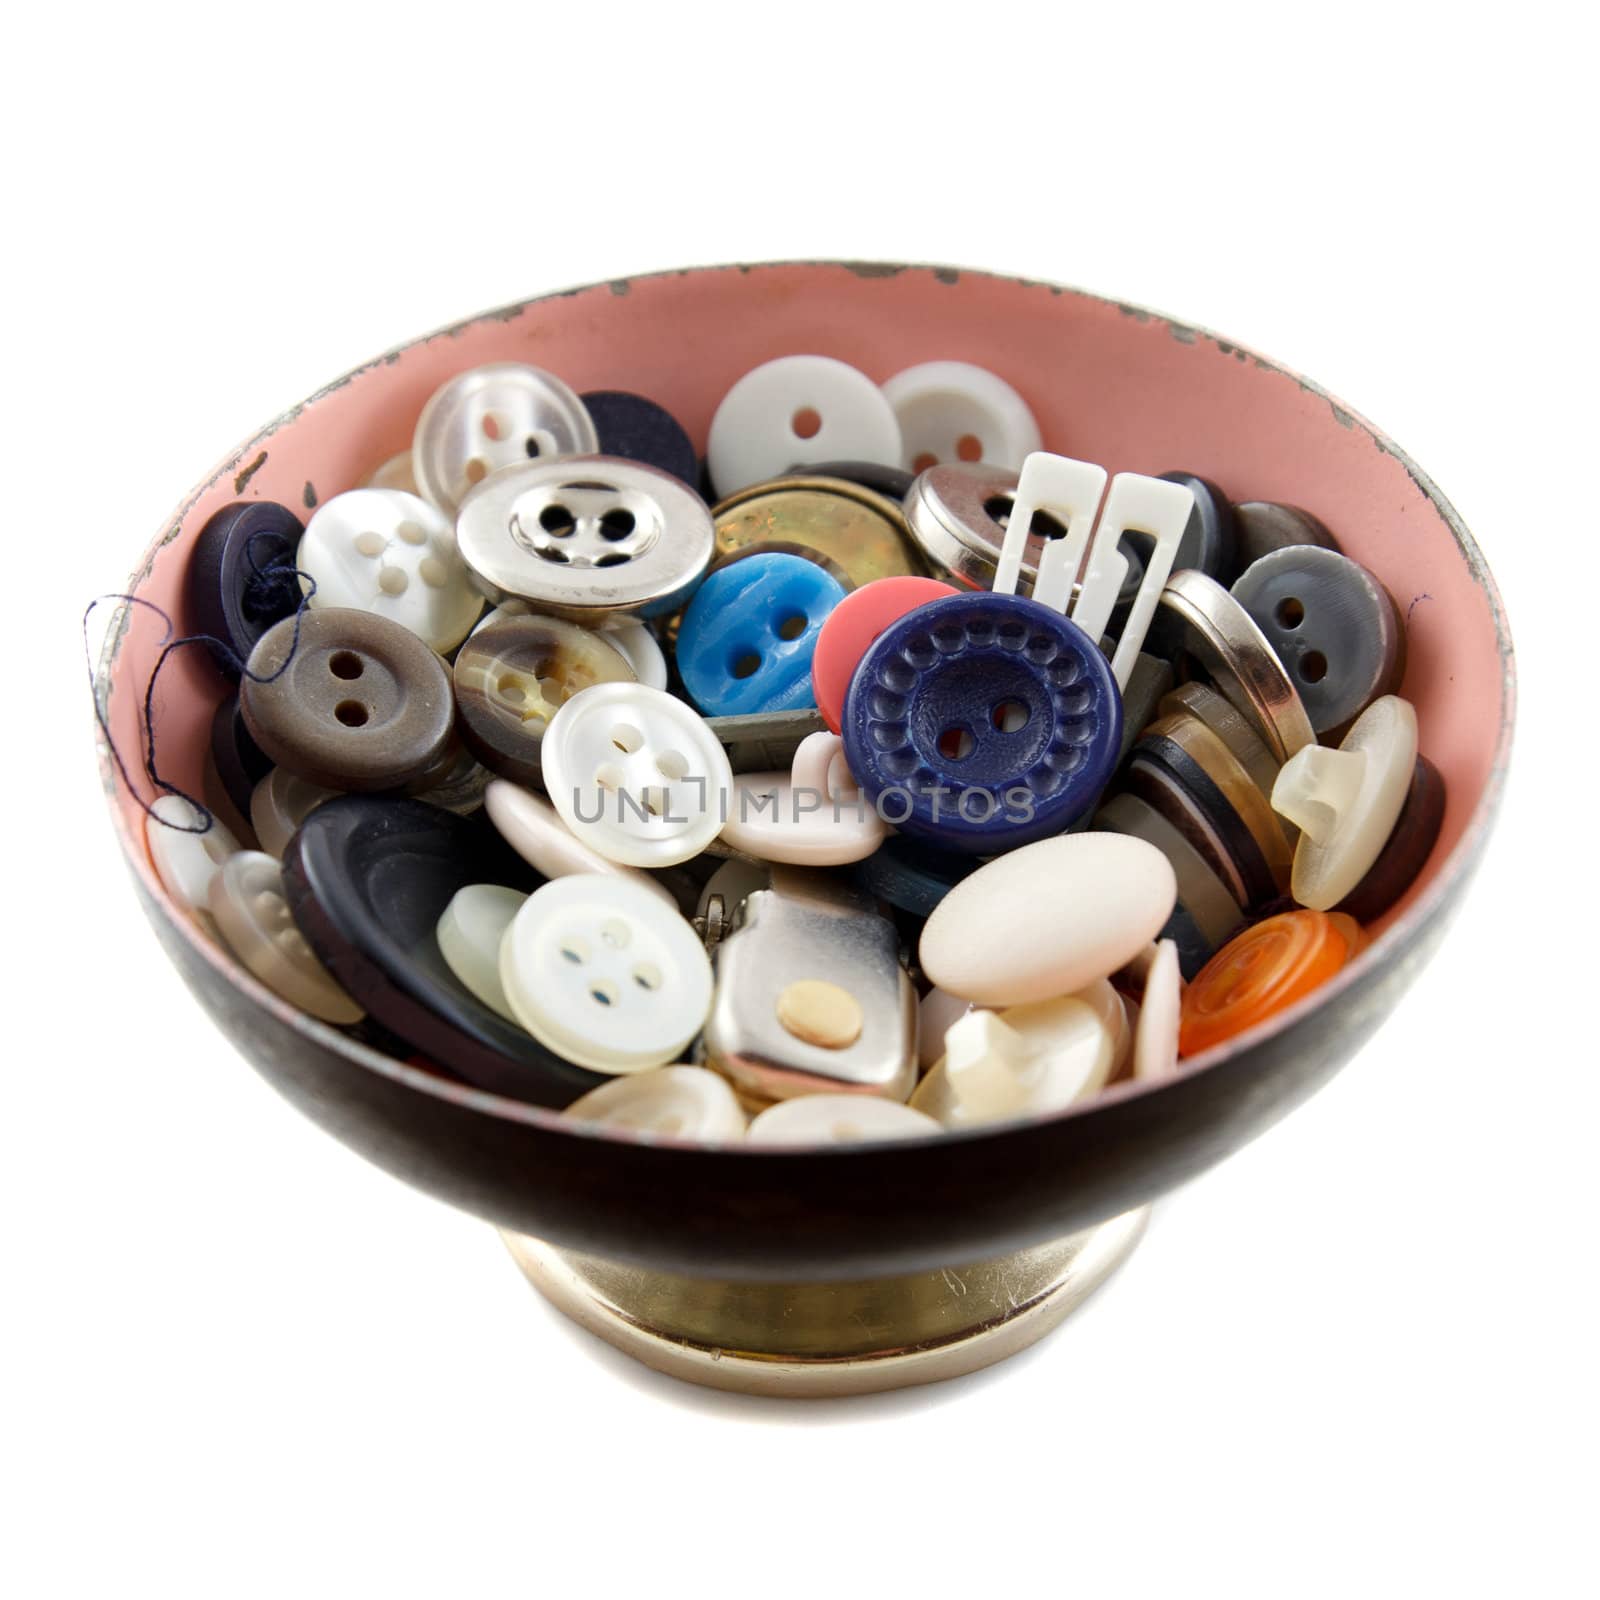 A bowl with buttons and other sewing accessories on a white background